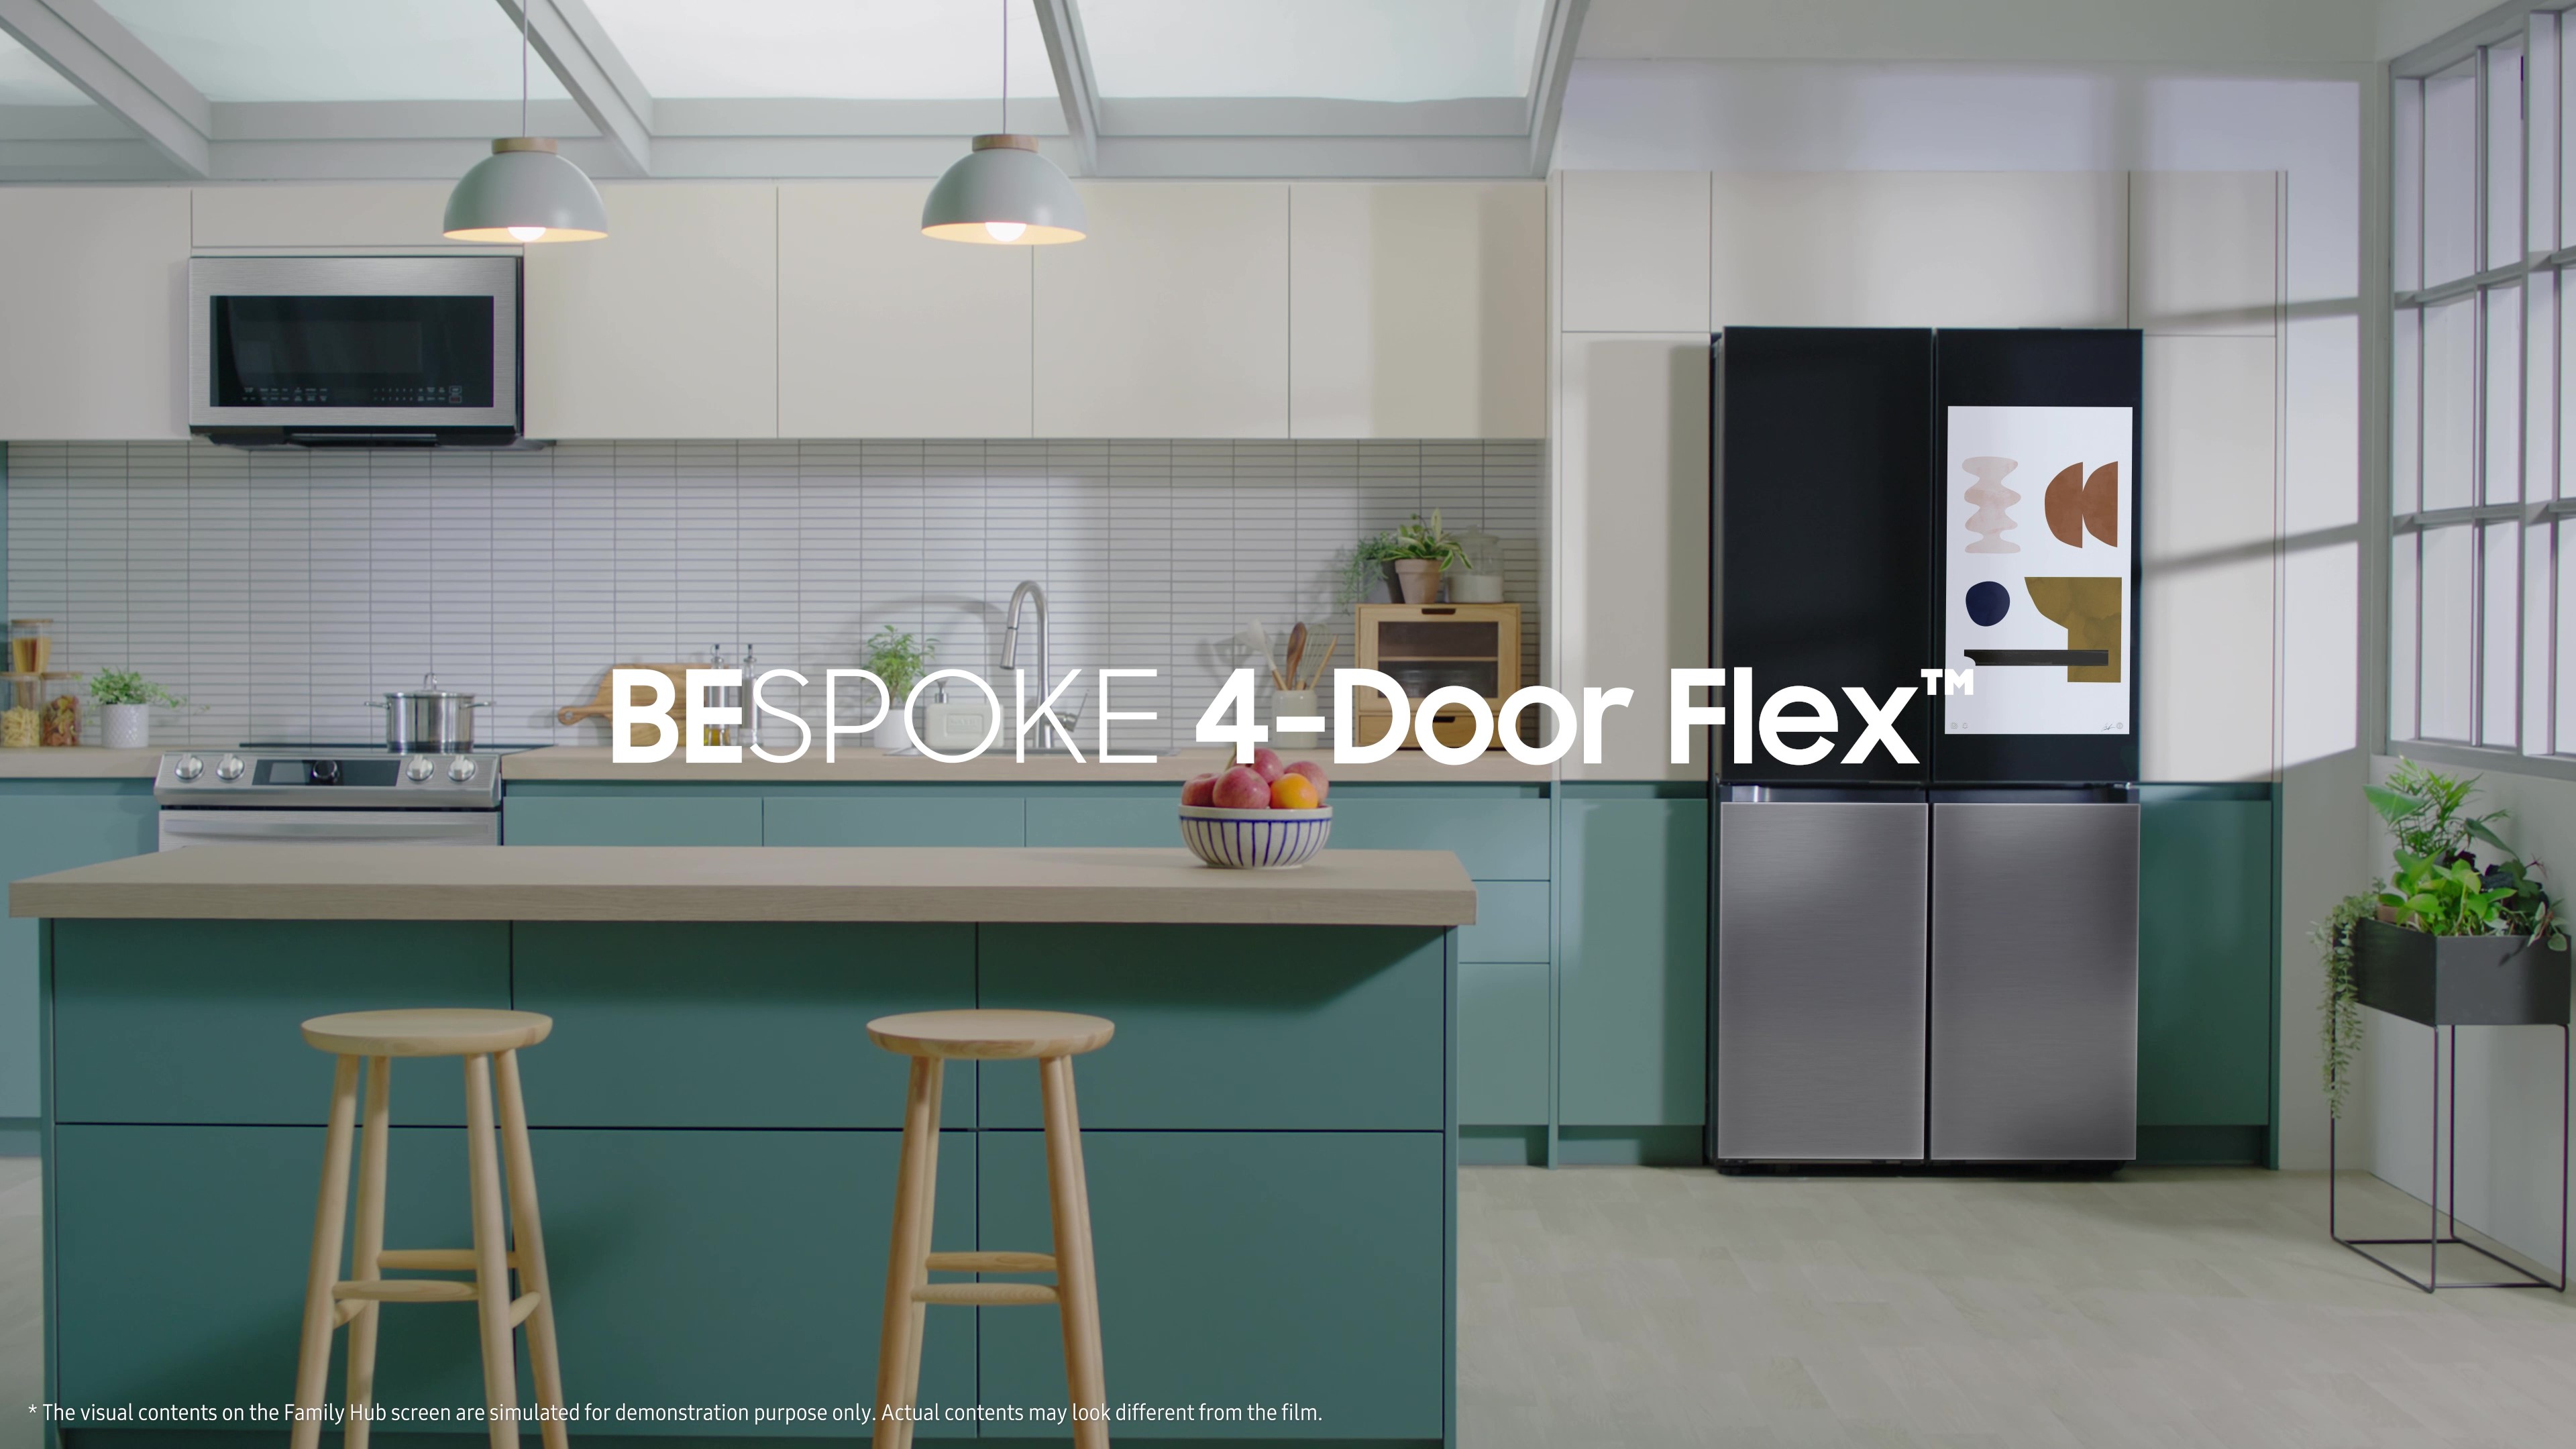 Bespoke Family Hub™+ – Samsung's Most Intelligent and Customizable  Refrigerator is Now Available - Samsung US Newsroom